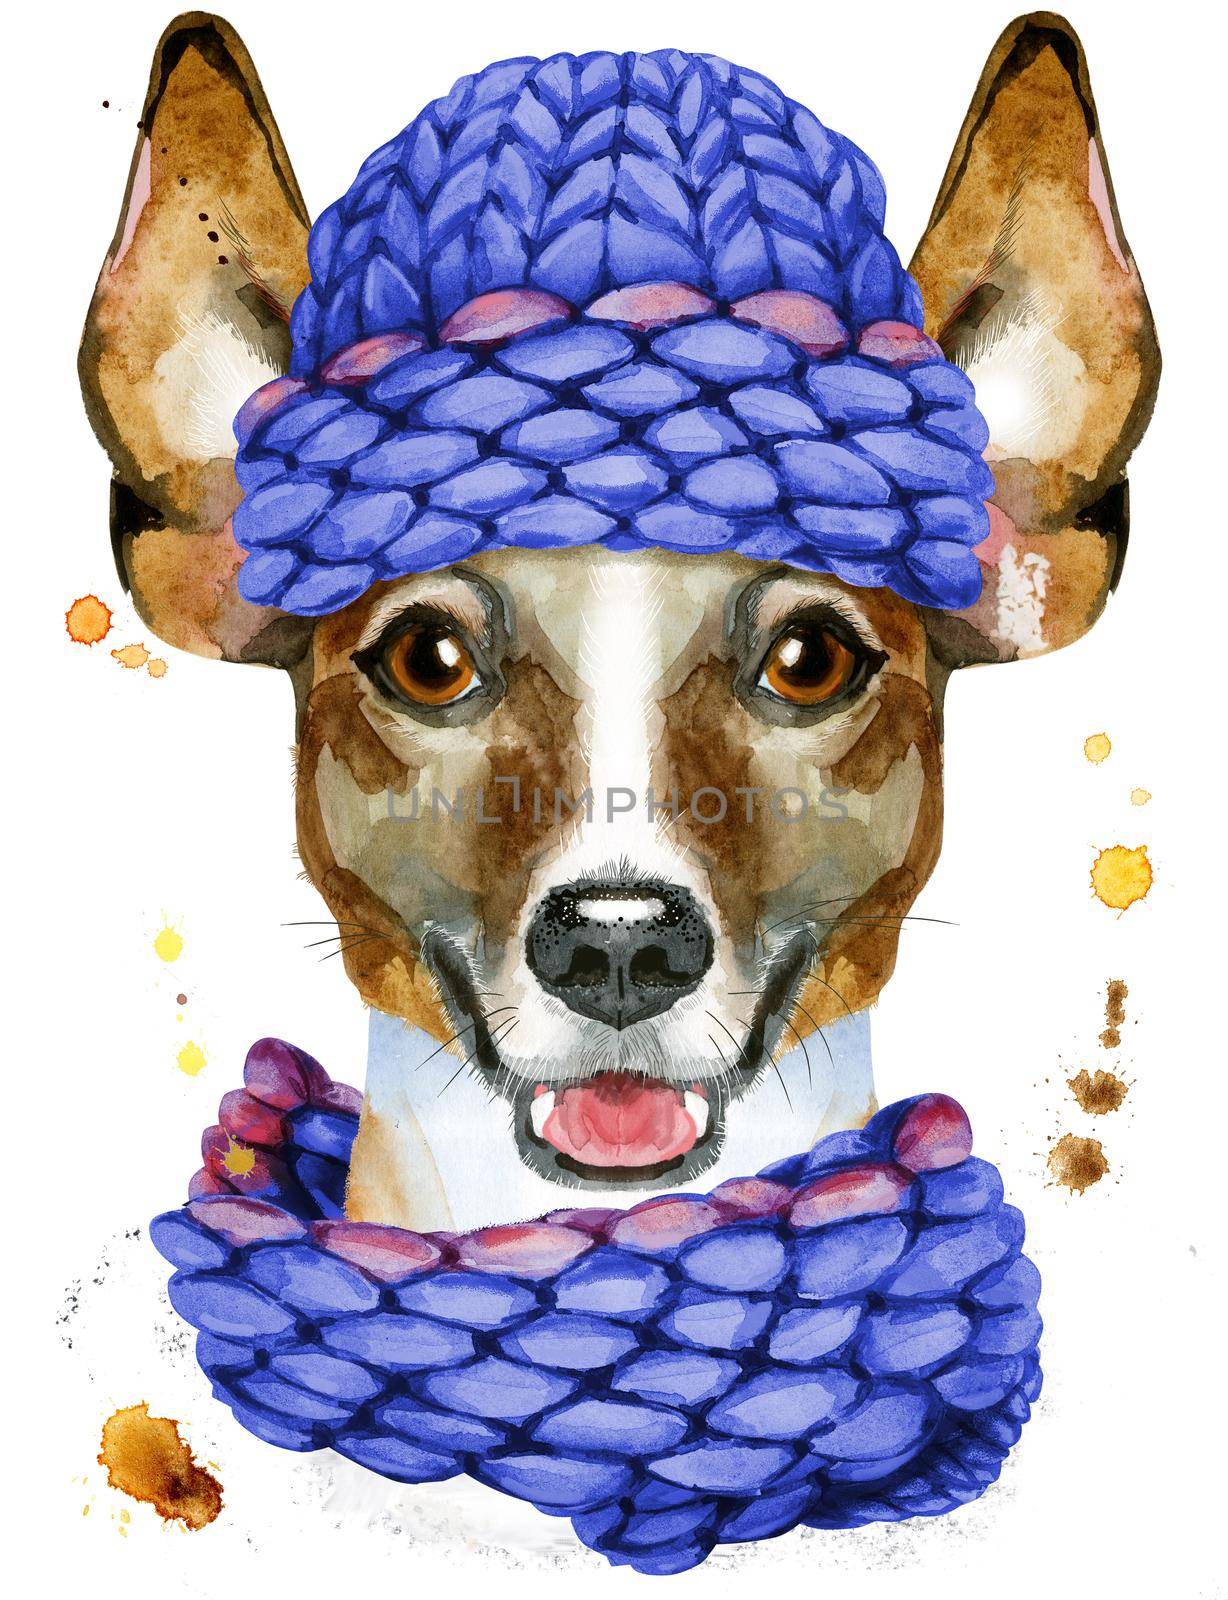 Cute Dog in a blue knitted hat. Dog T-shirt graphics. watercolor jack russell terrier illustration